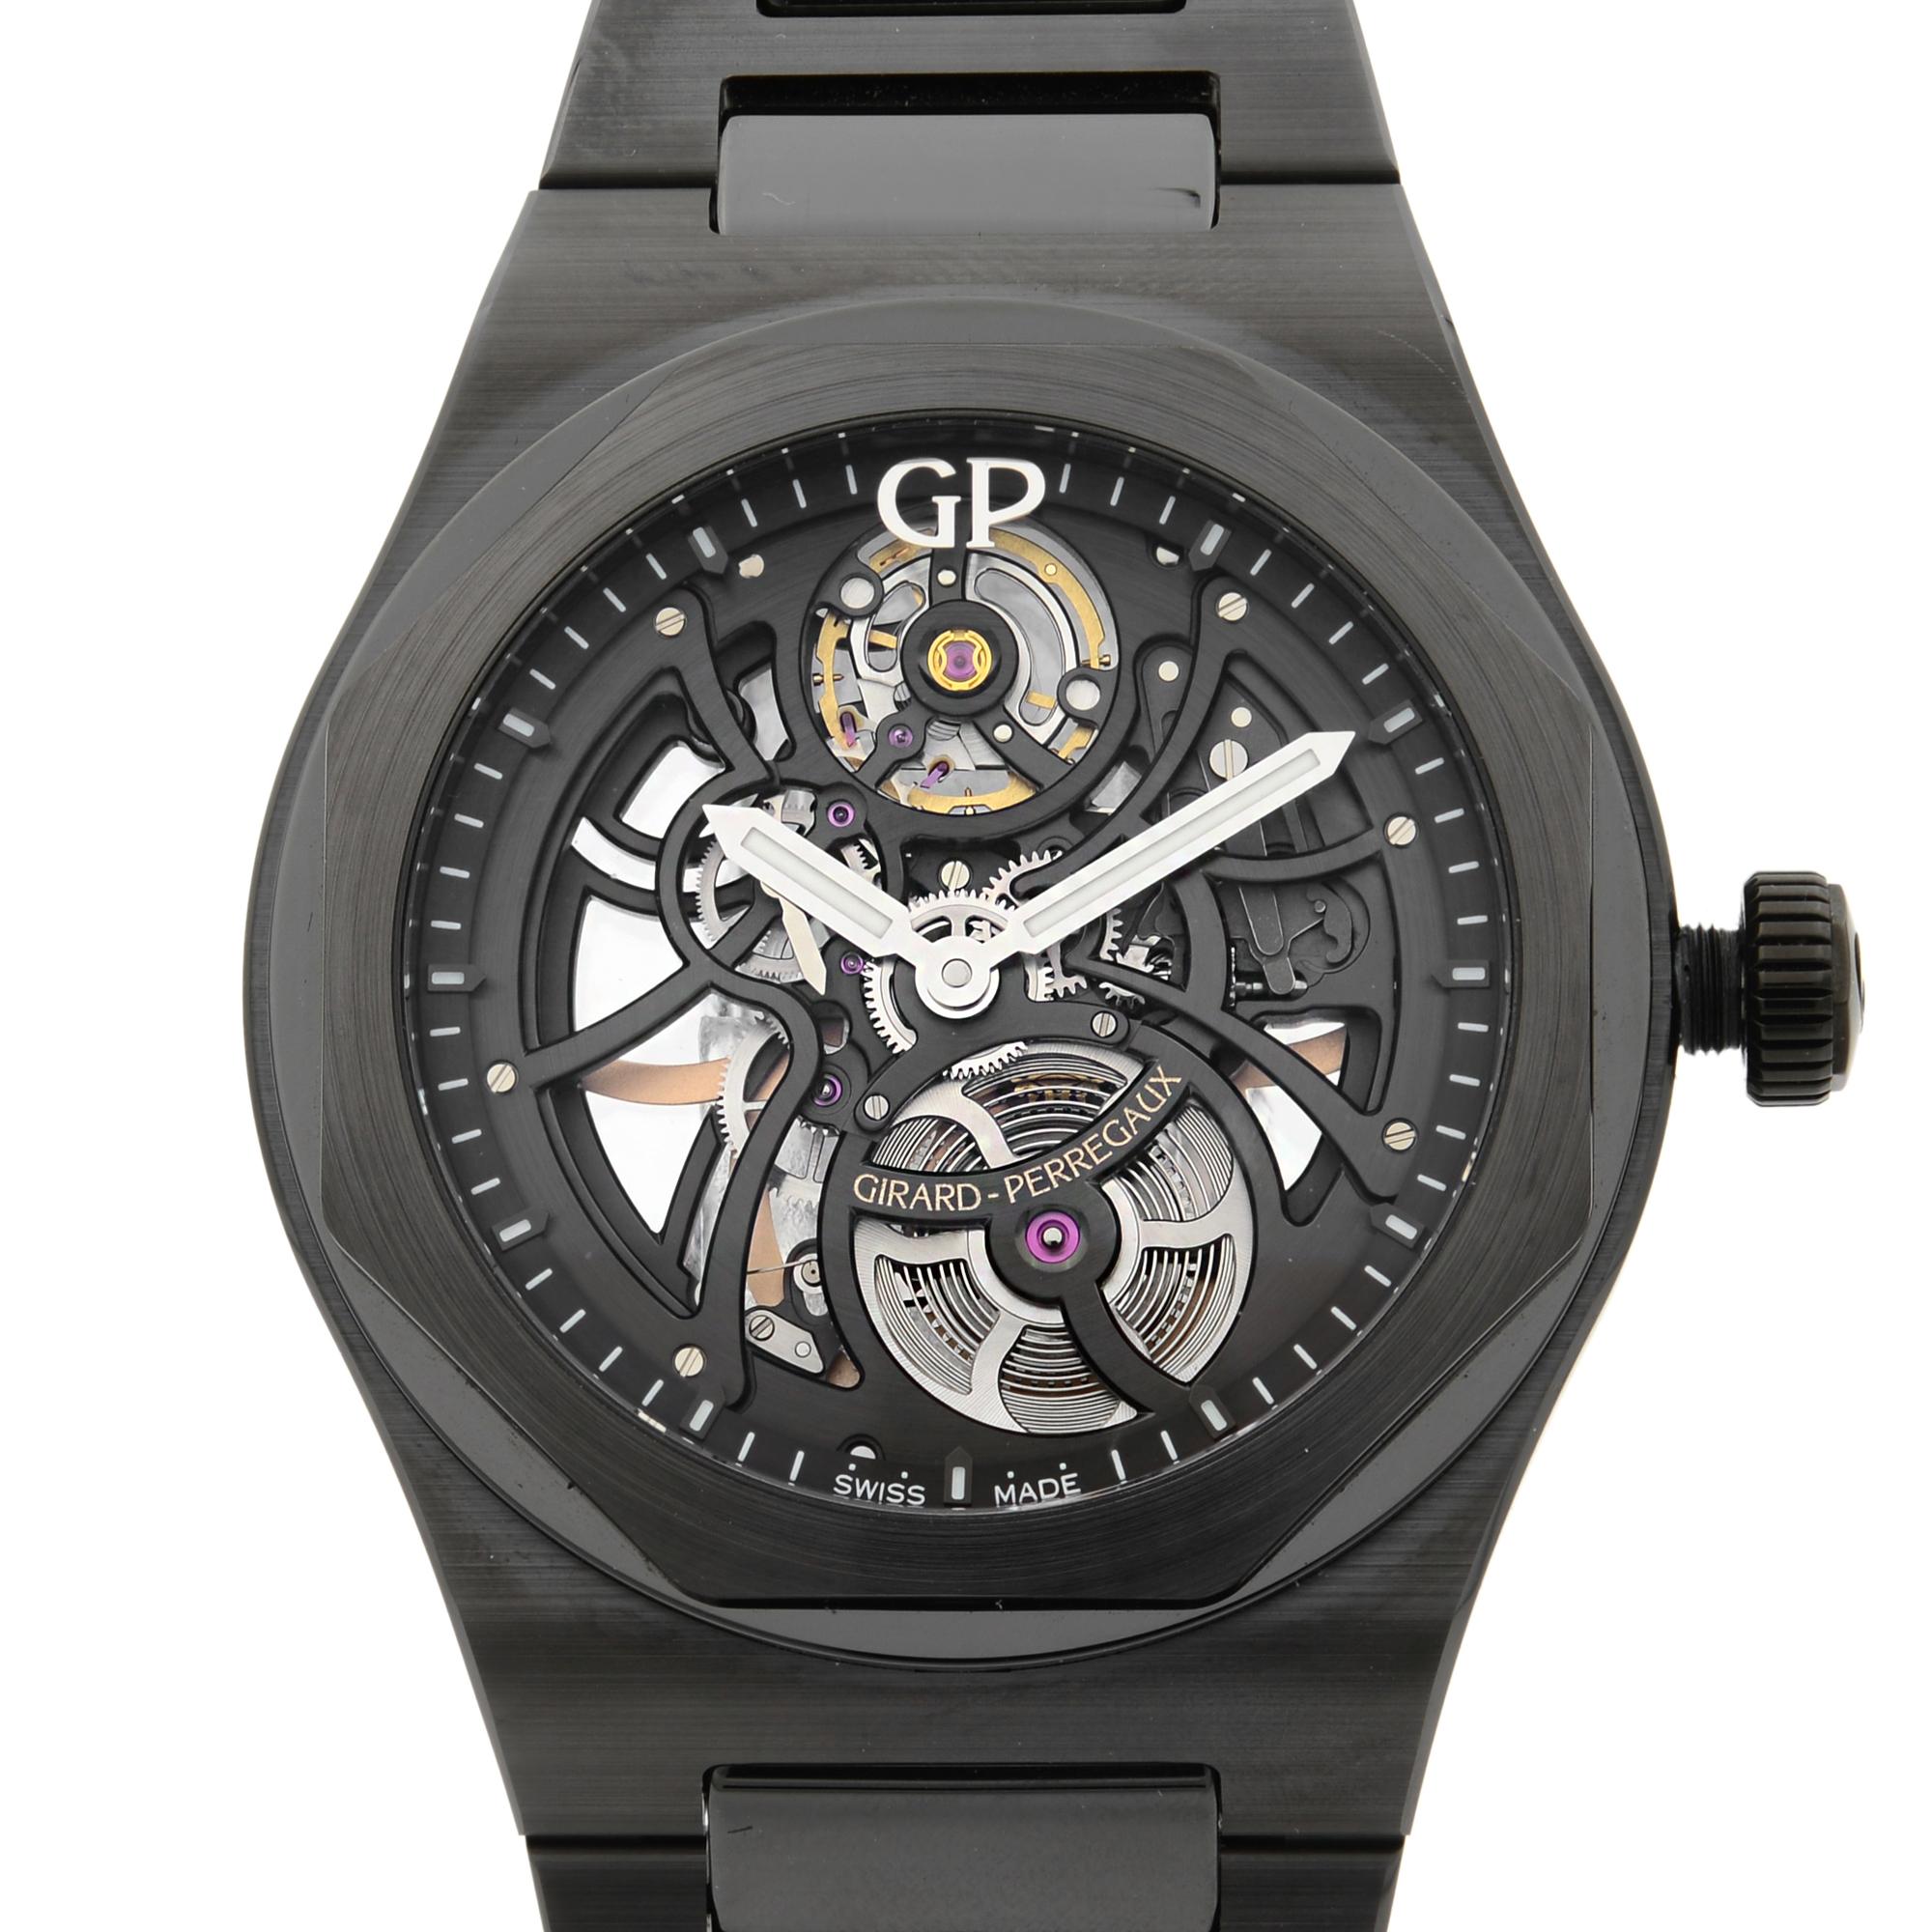 This brand new Girard-Perregaux Laureato  81015-32-001-32A is a beautiful men's timepiece that is powered by mechanical (automatic) movement which is cased in a ceramic case. It has a round shape face, no features dial and has hand sticks style